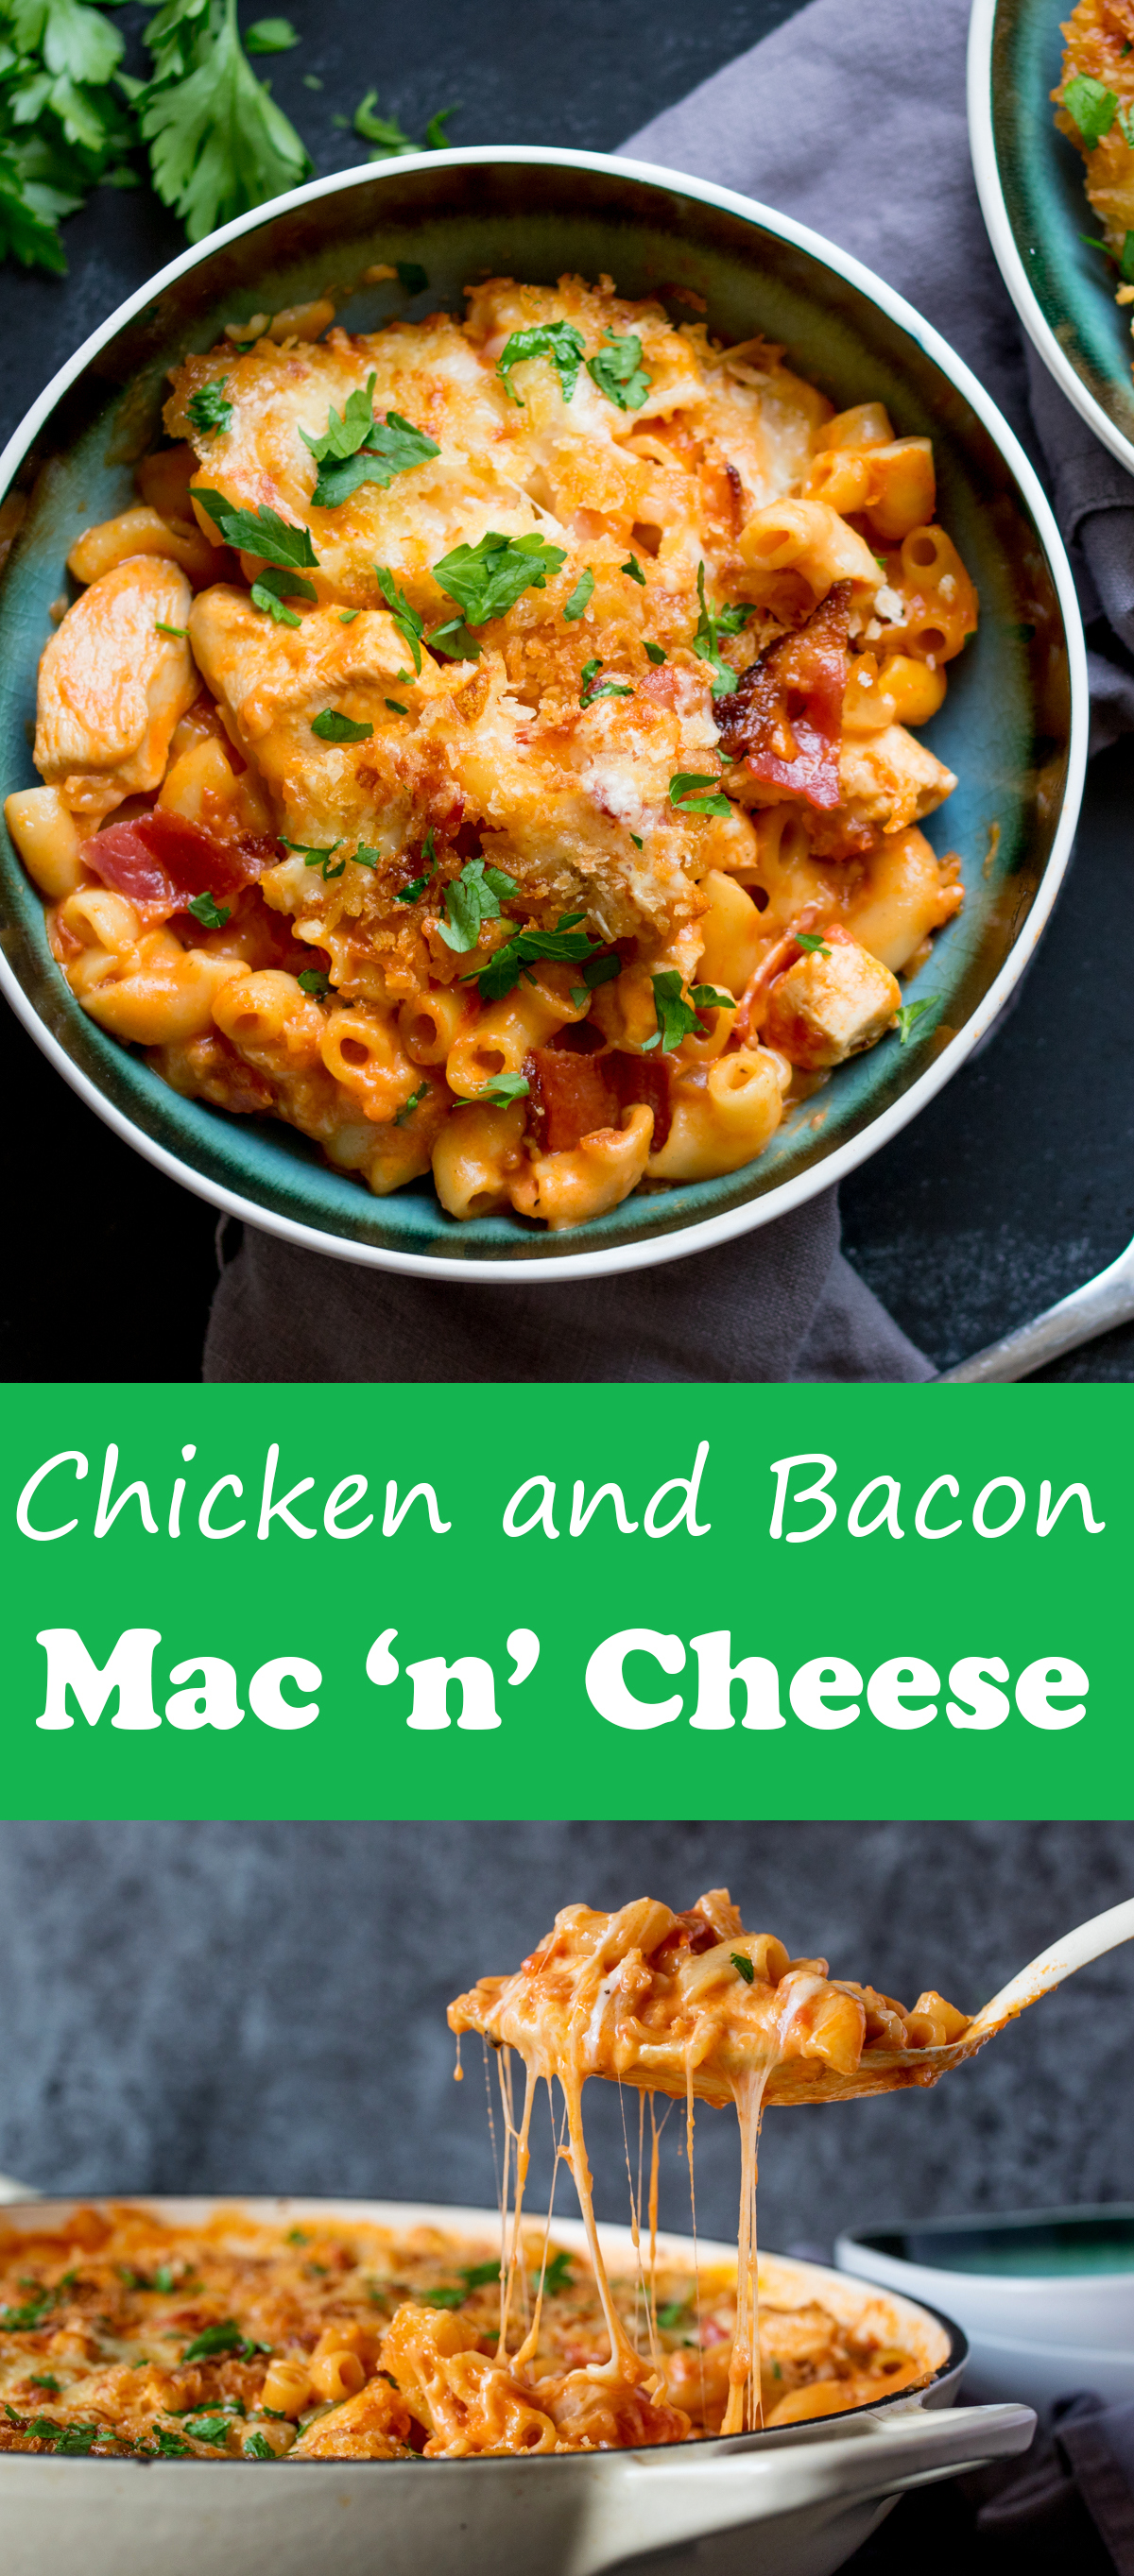 Chicken, Bacon and Tomato Mac N' Cheese - a comforting dinner with lots of flavor!